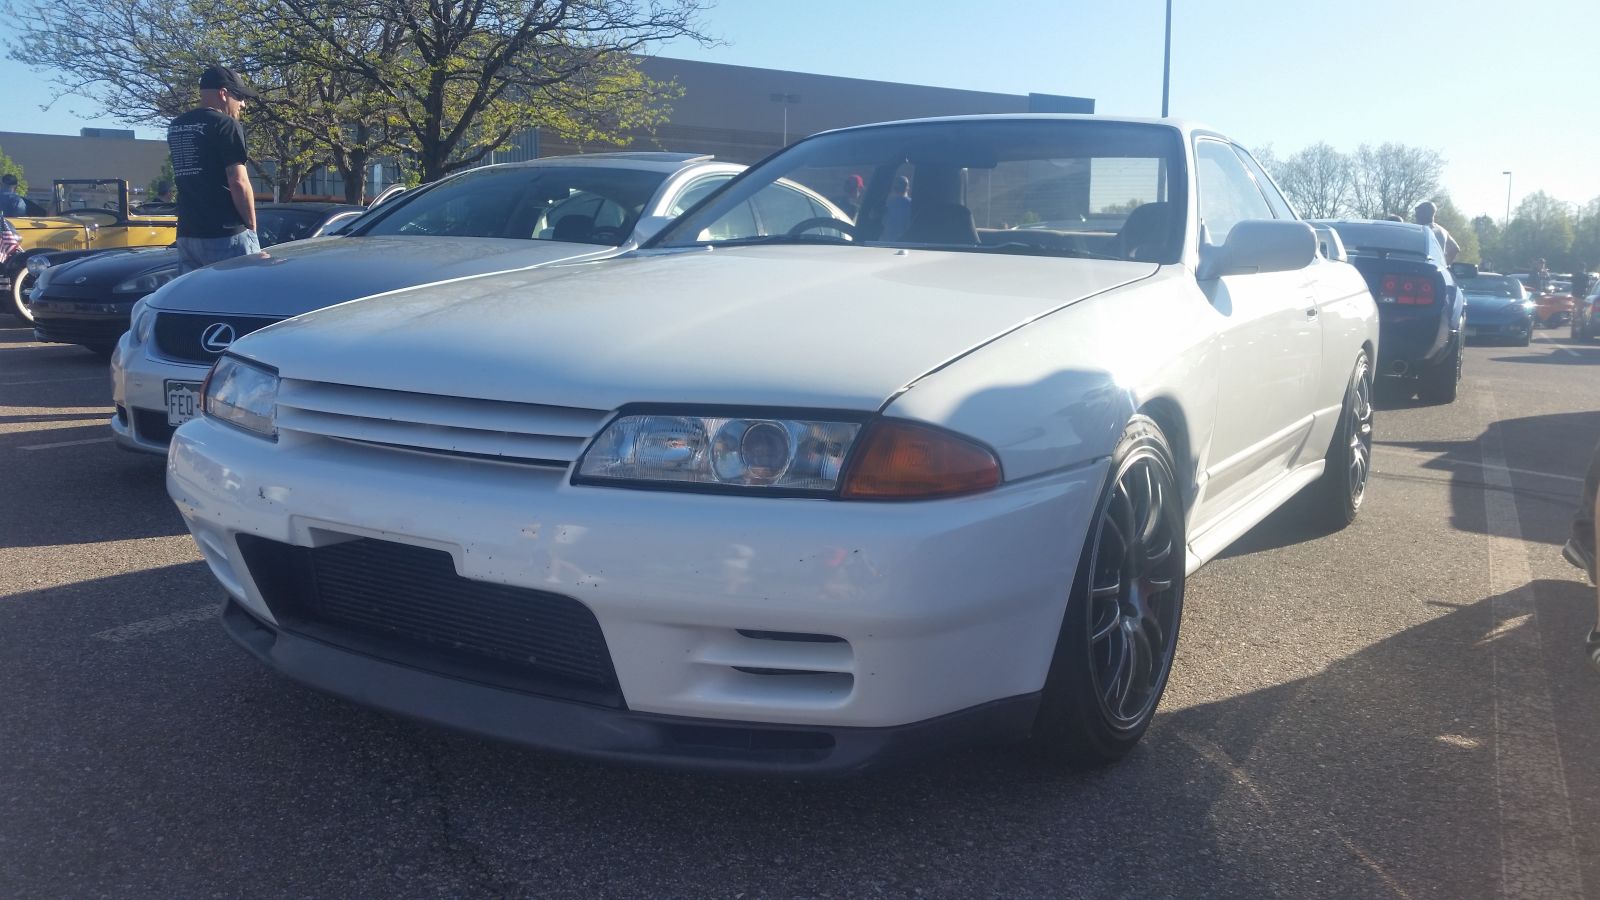 R32 (quite a few of these showed up)